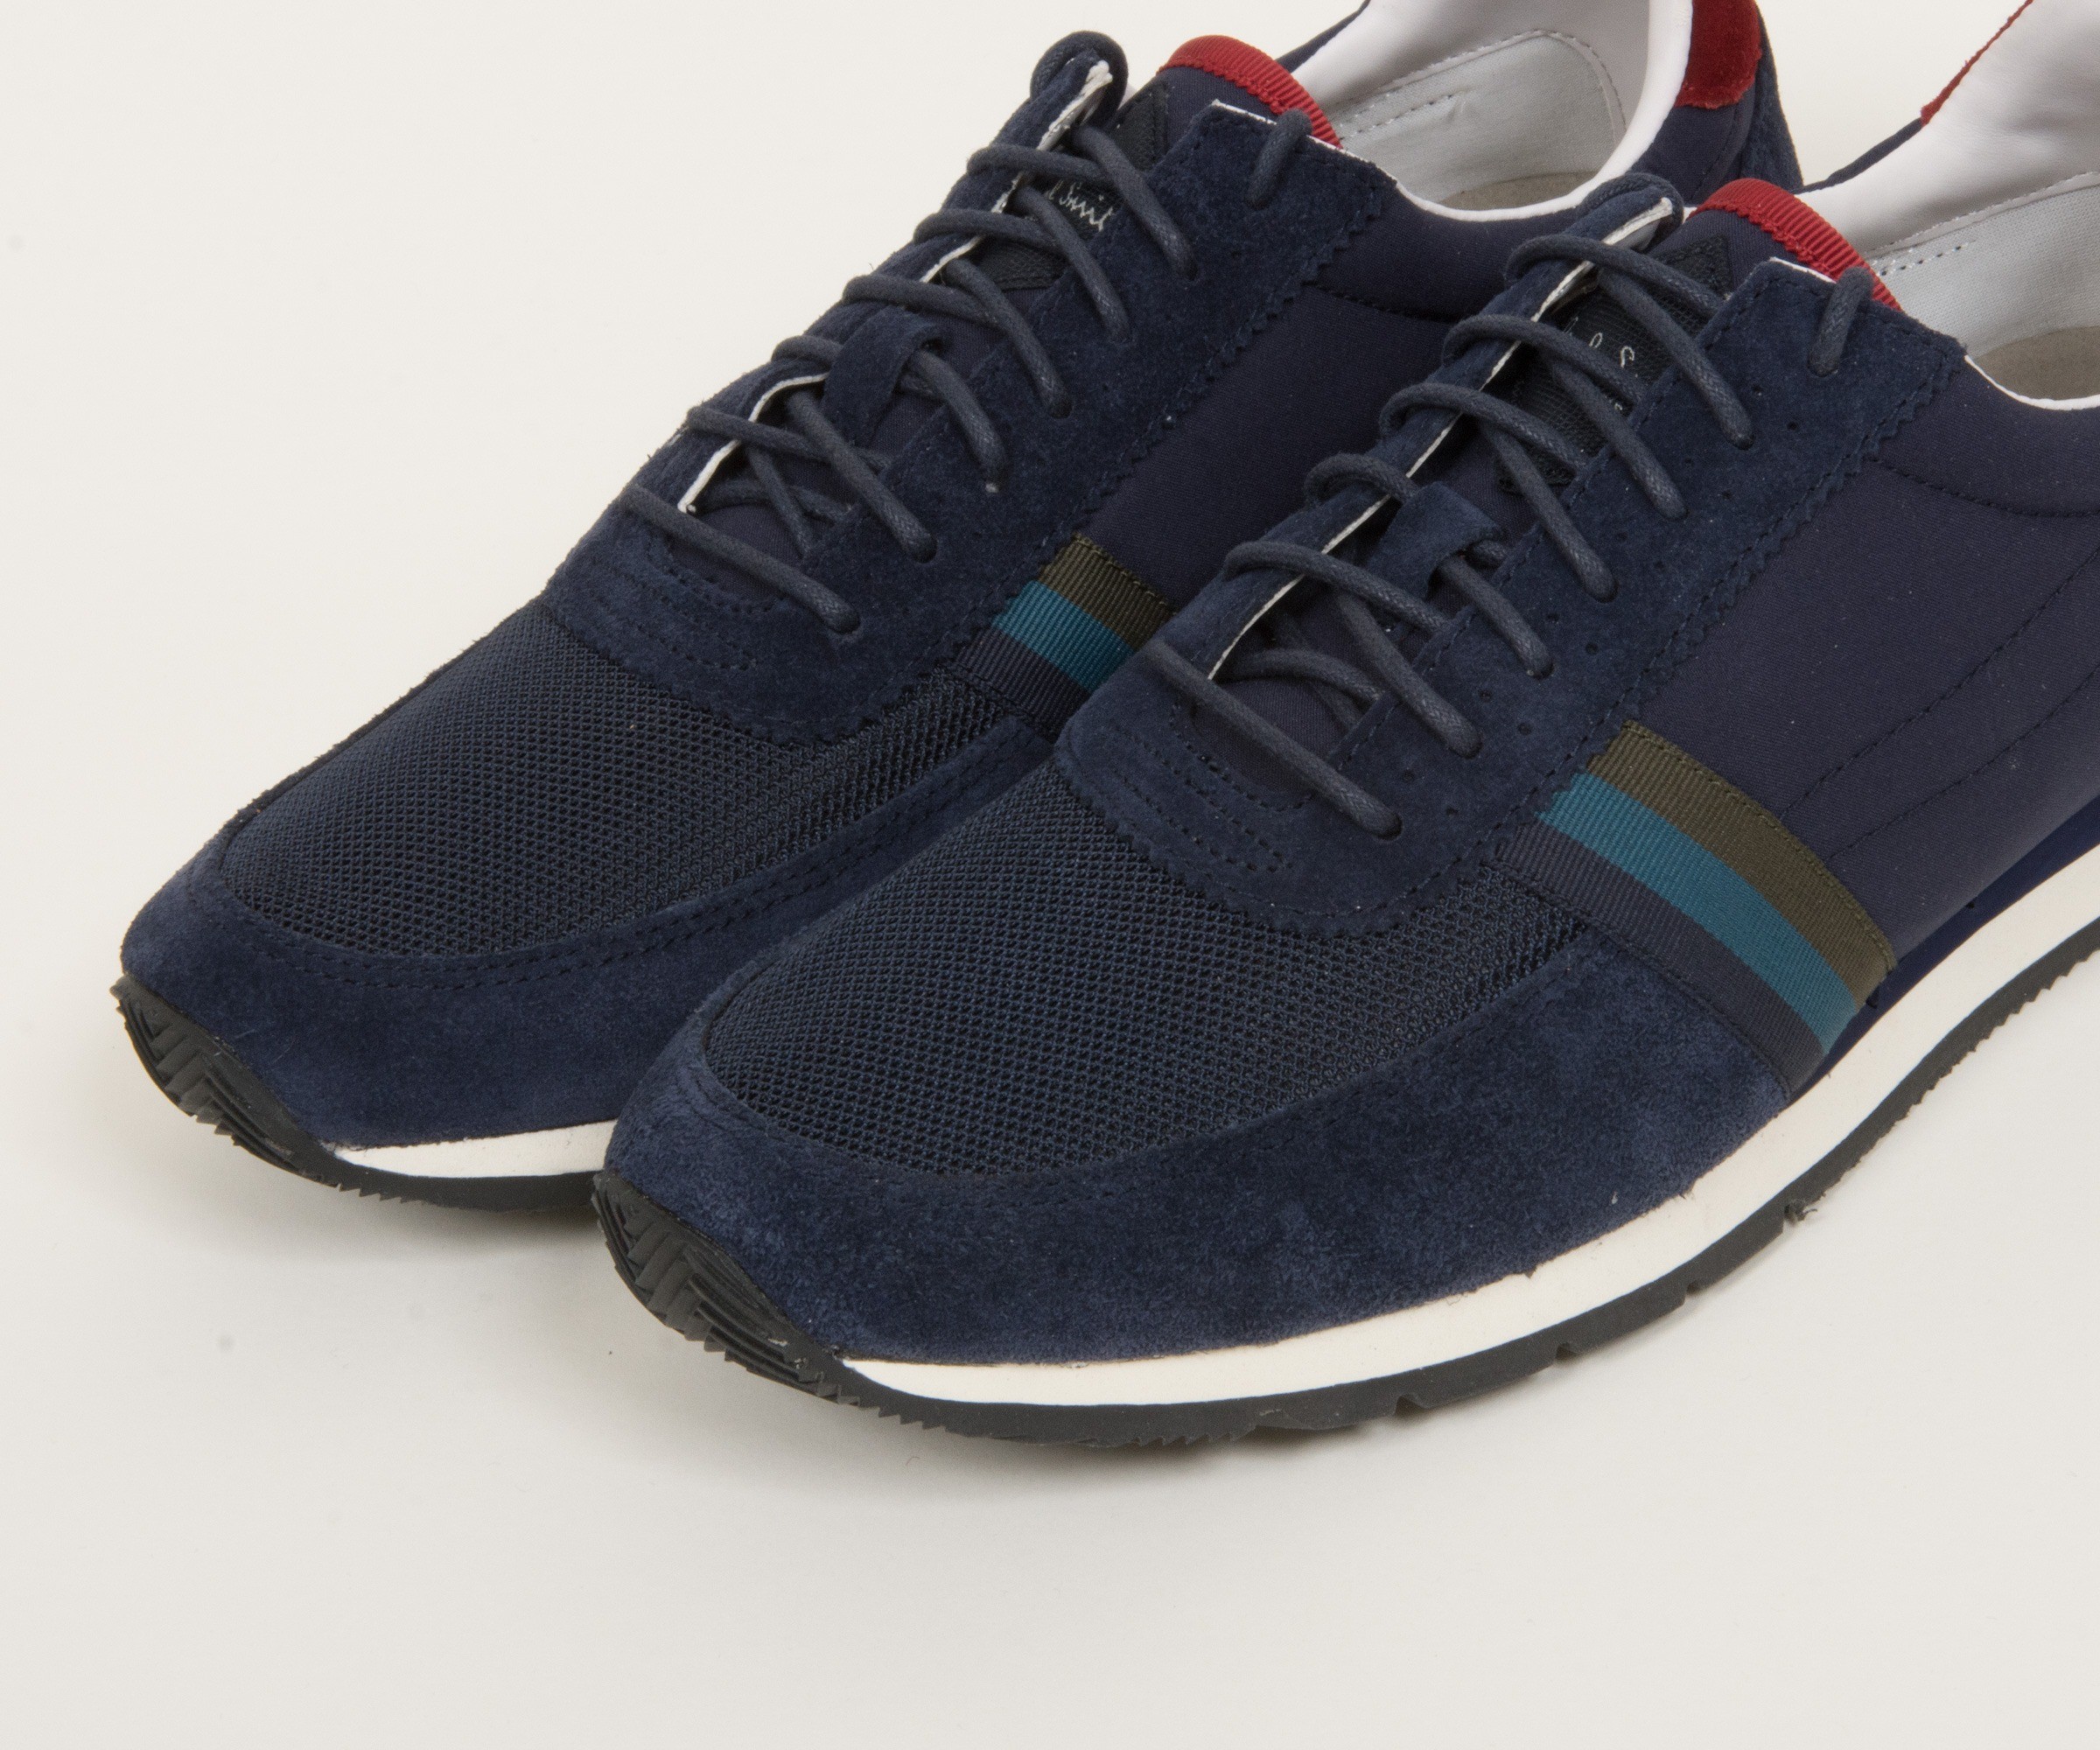 Paul Smith Shoes Moogg Sued Trainer With Mesh Toe Navy